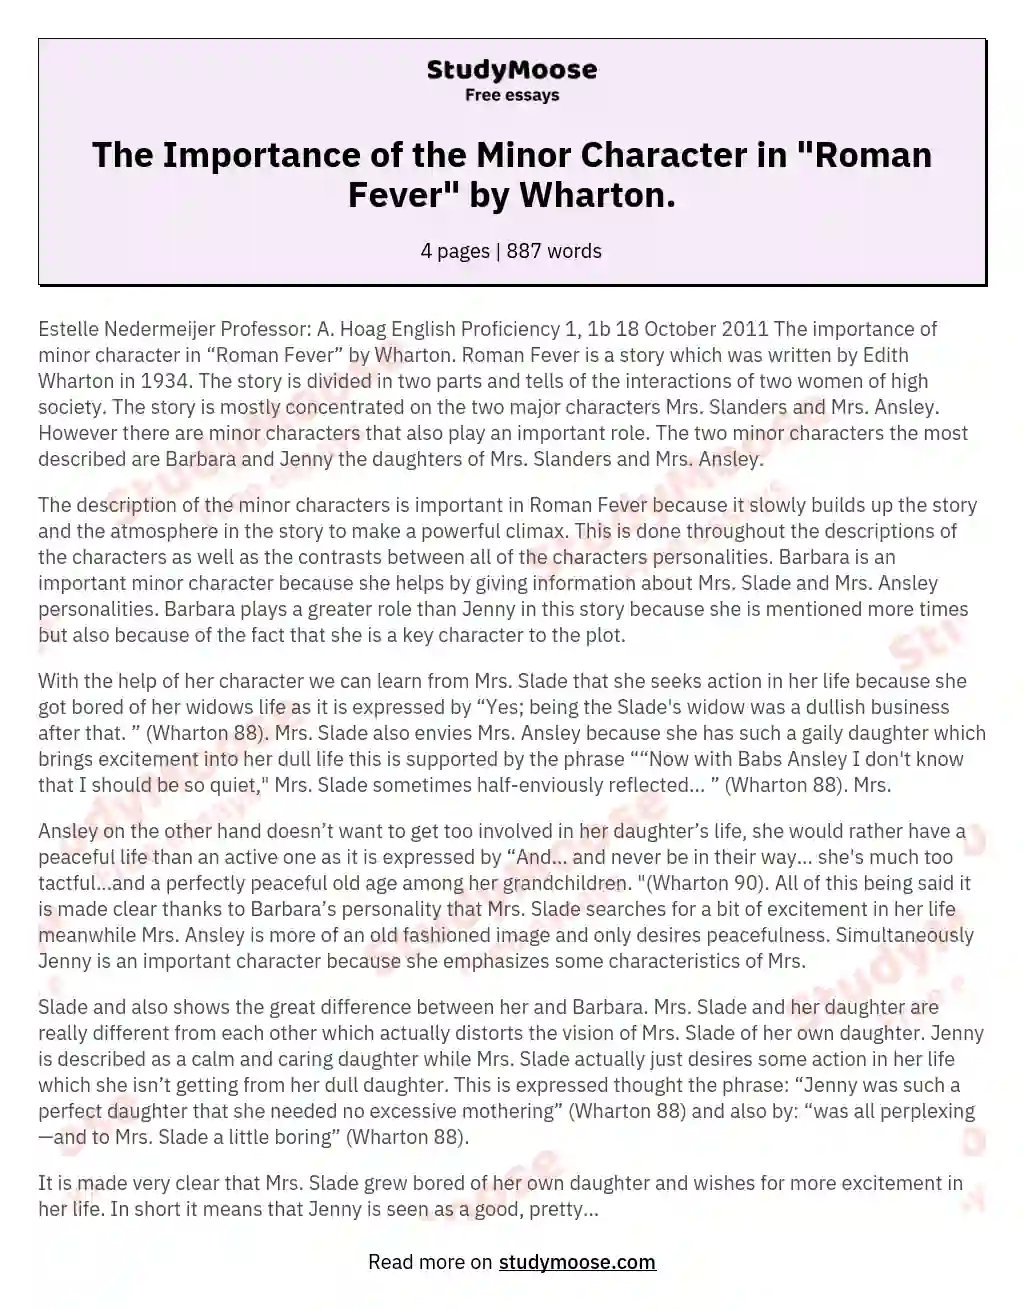 The Importance of the Minor Character in "Roman Fever" by Wharton. essay